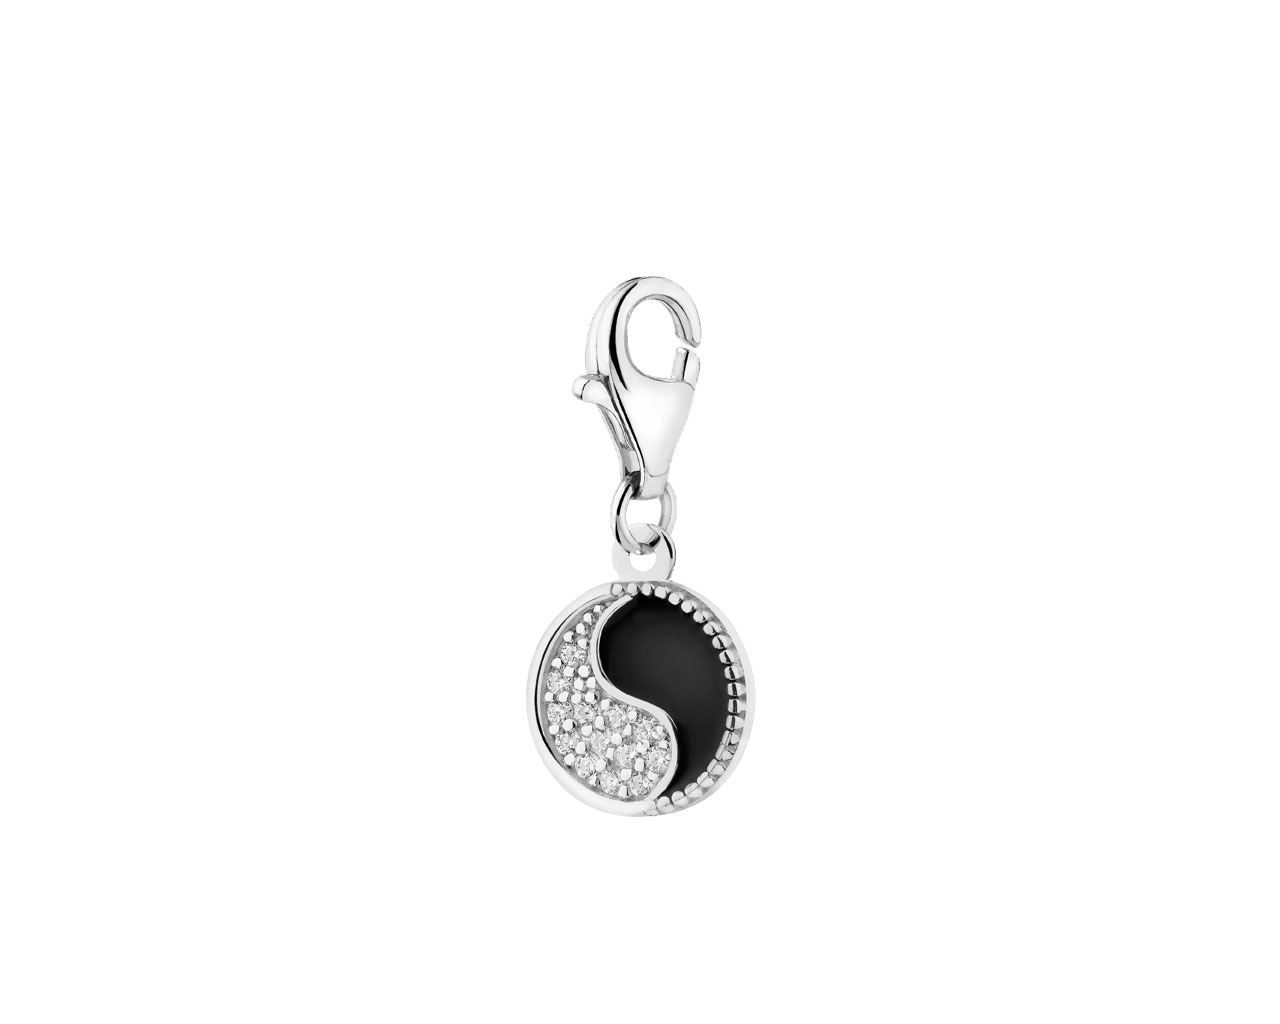 Rhodium Plated Silver Pendant with Cubic Zirconia